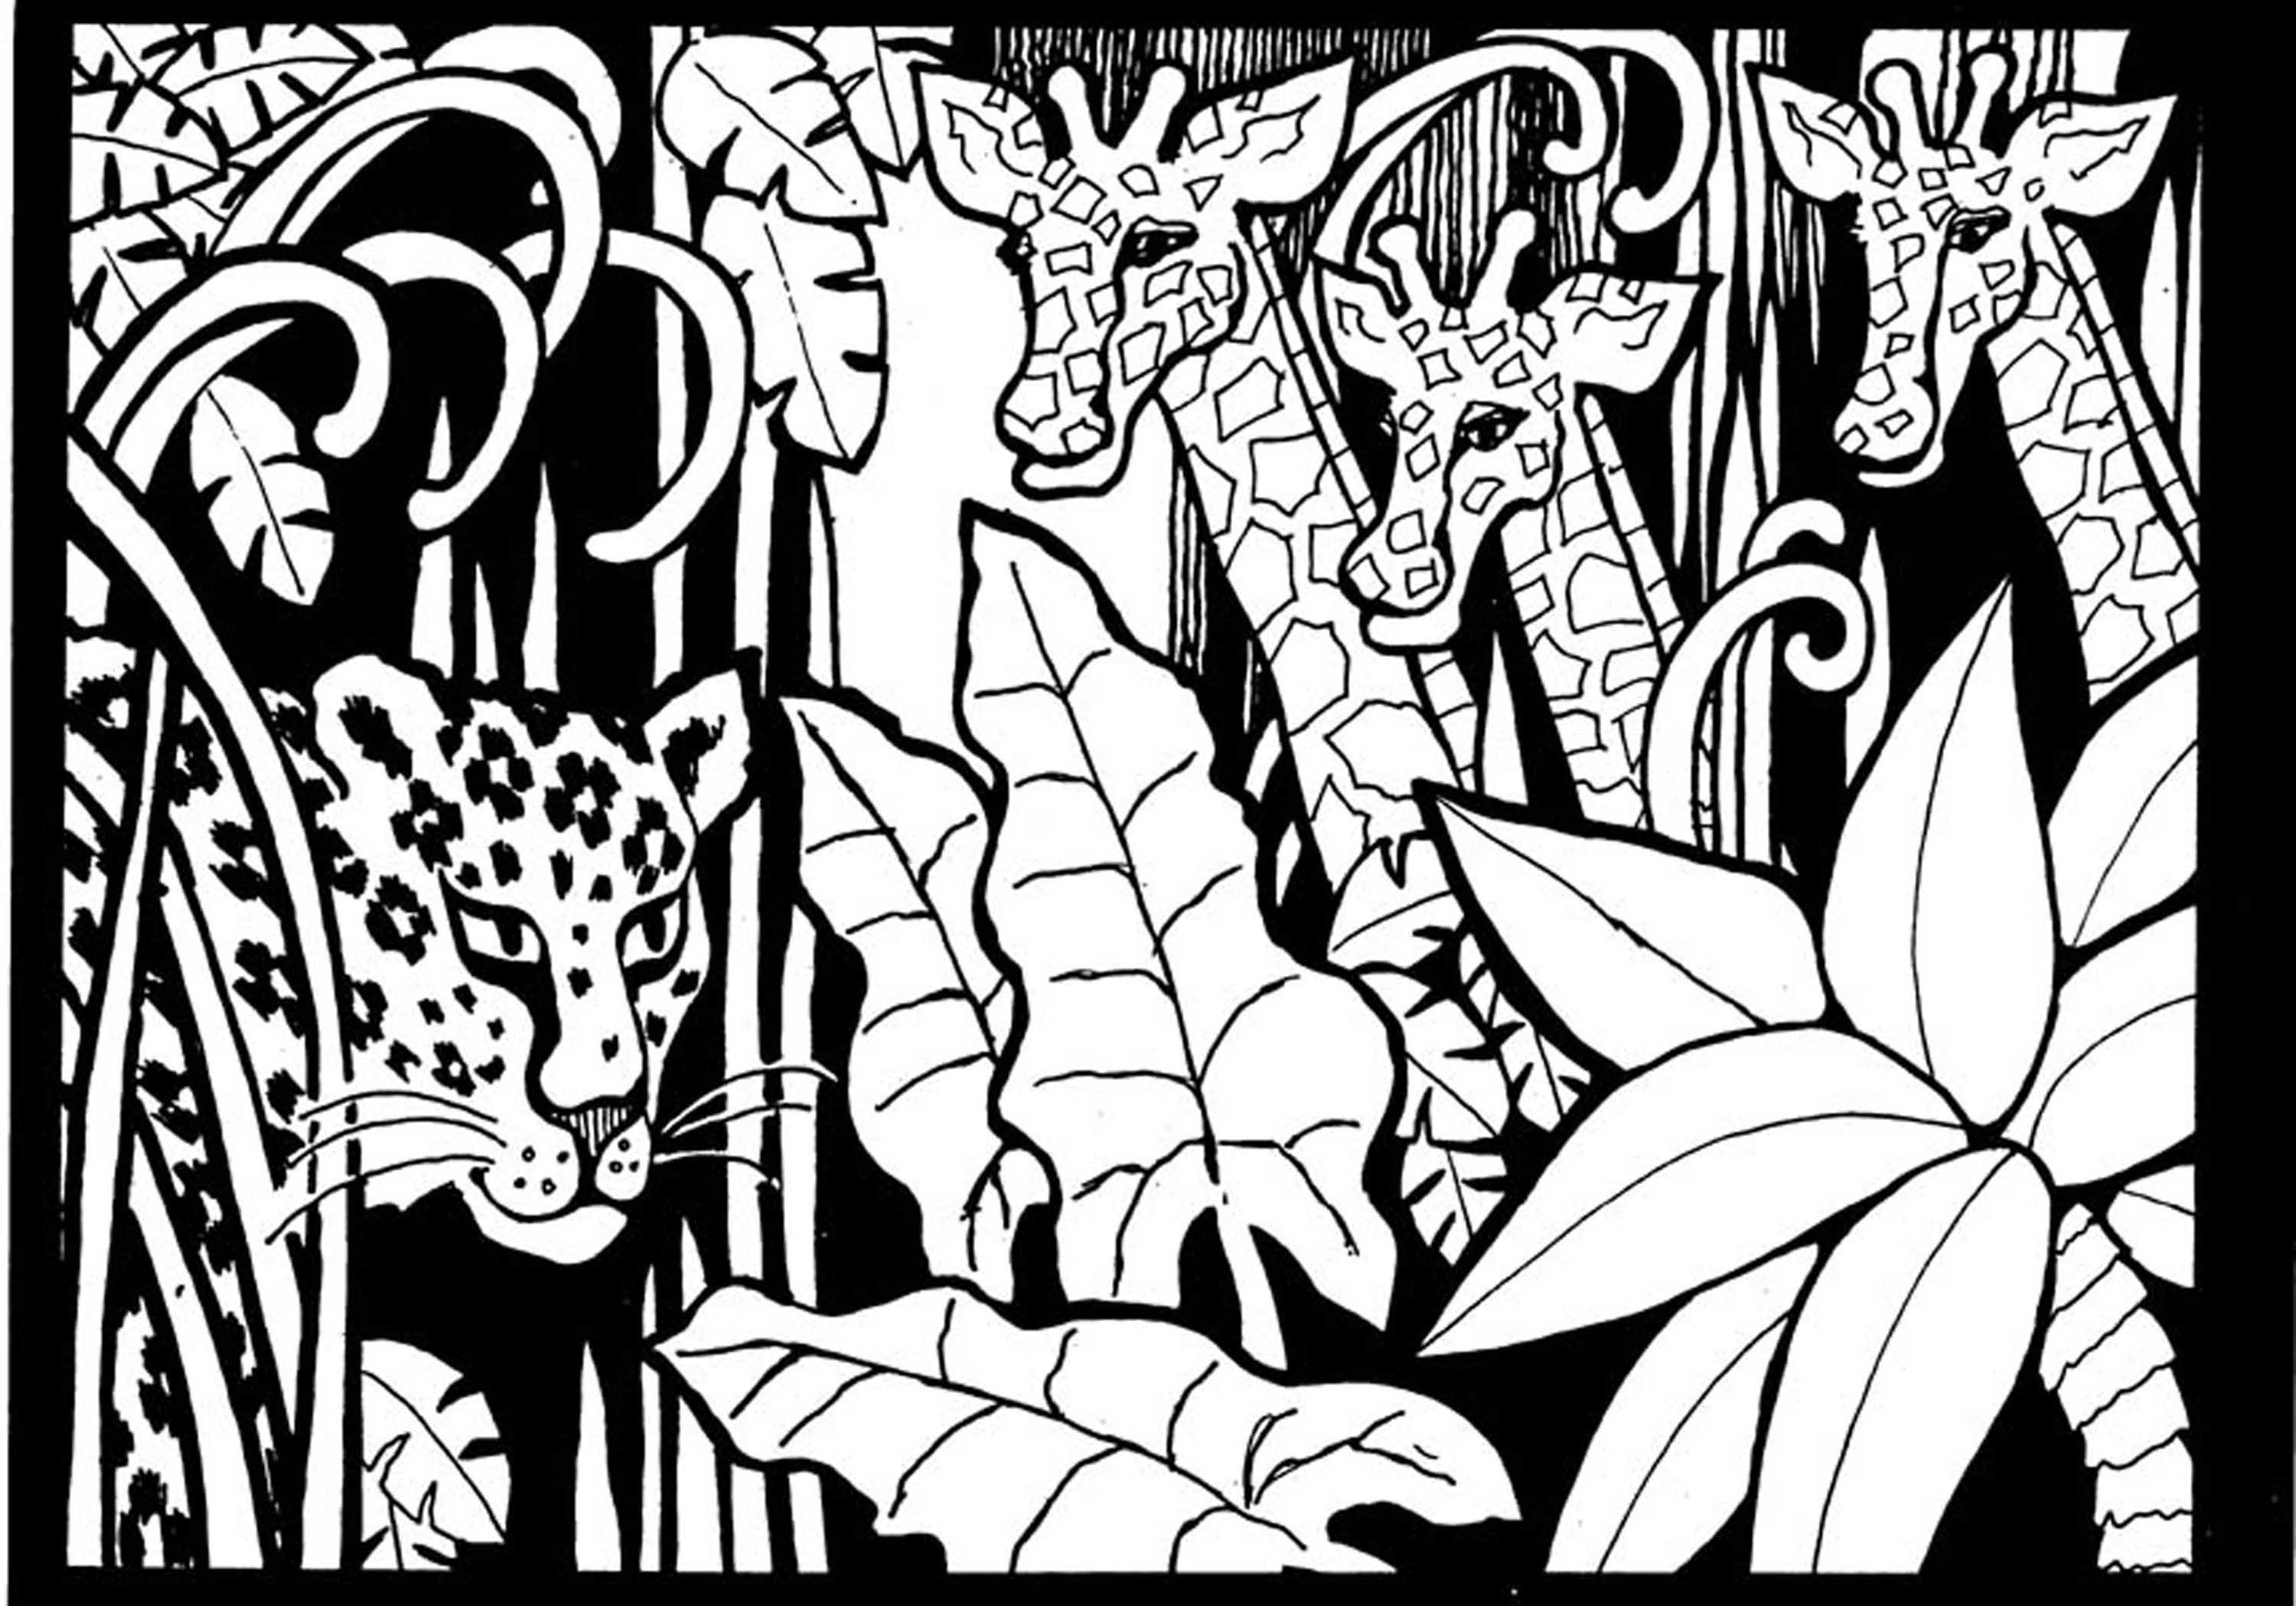 africa coloring pages to print